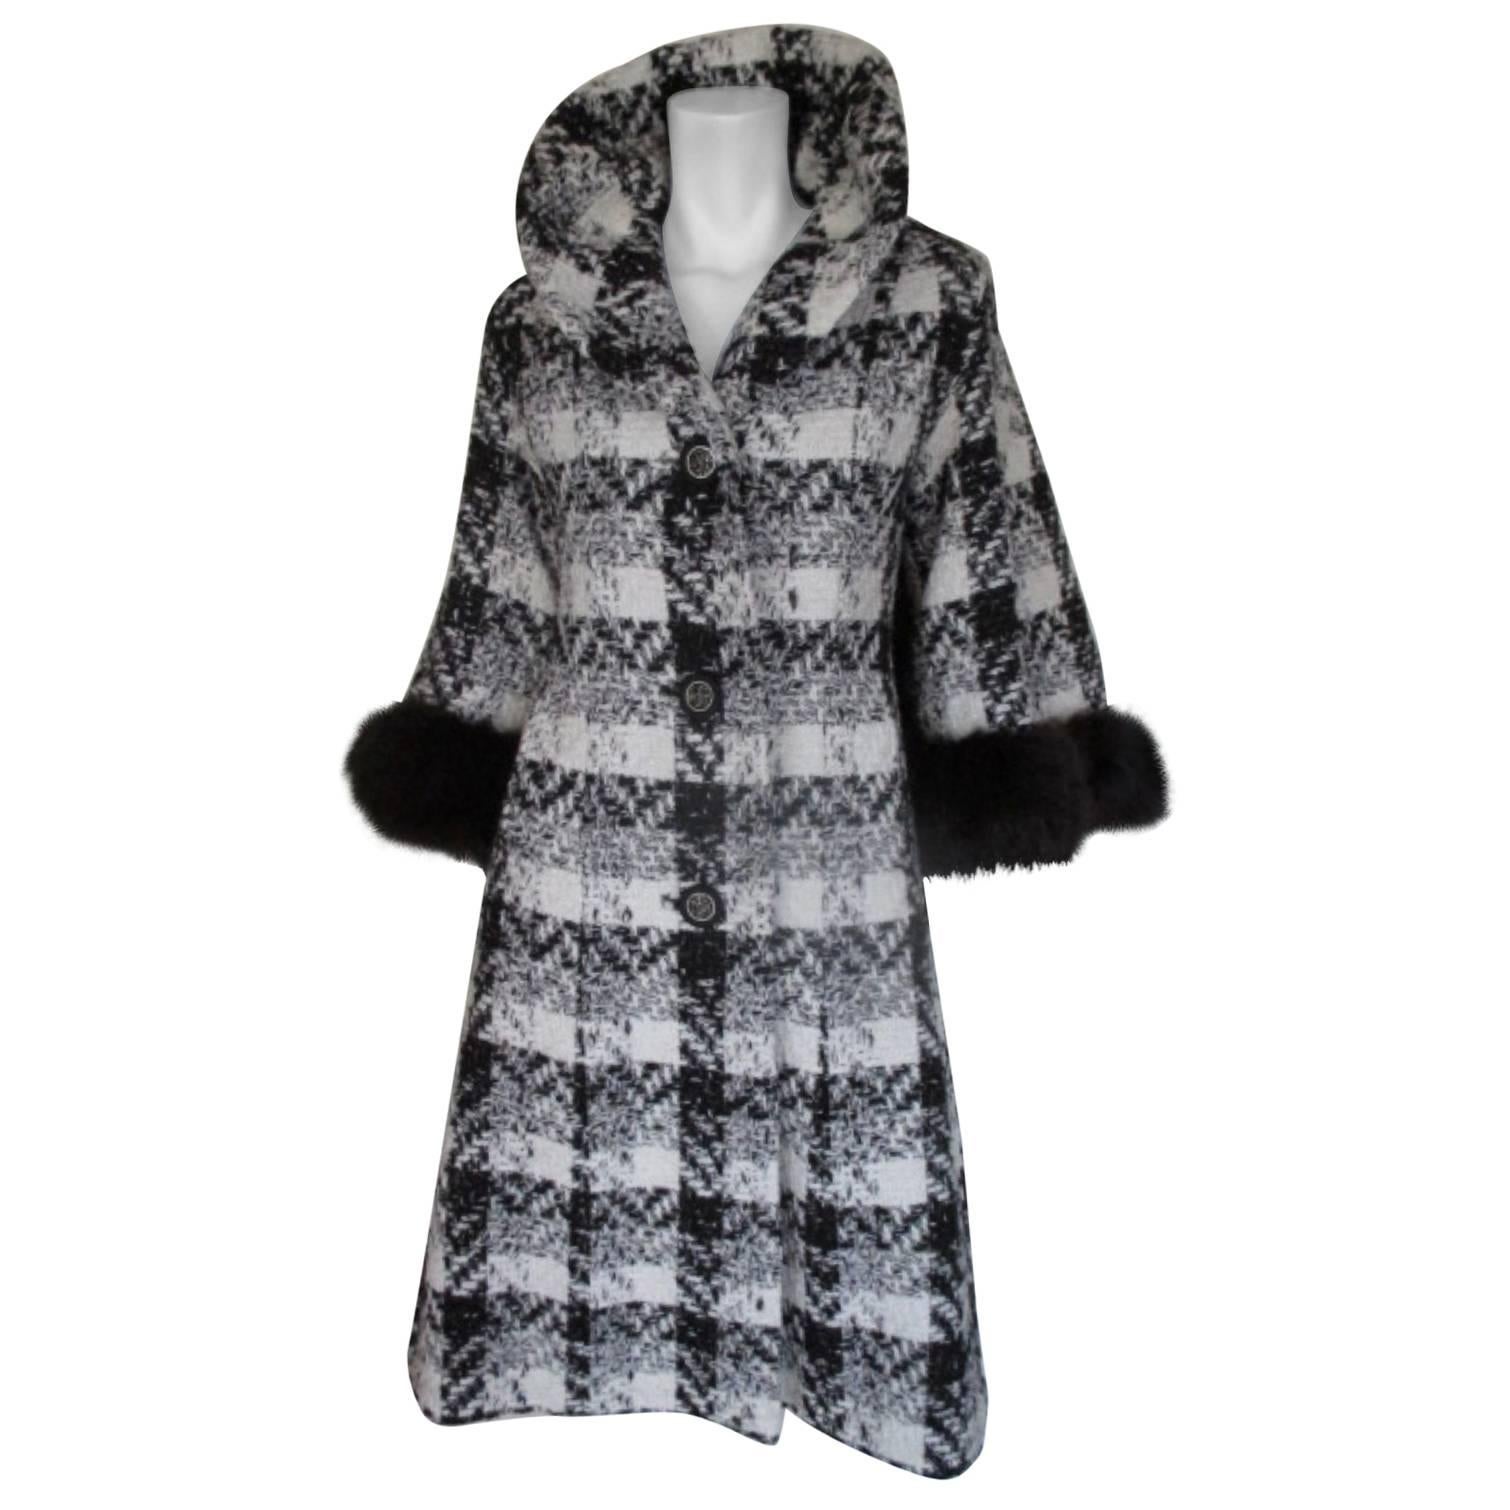 Stylish Check Wool Cape Coat with Black Fox Fur For Sale